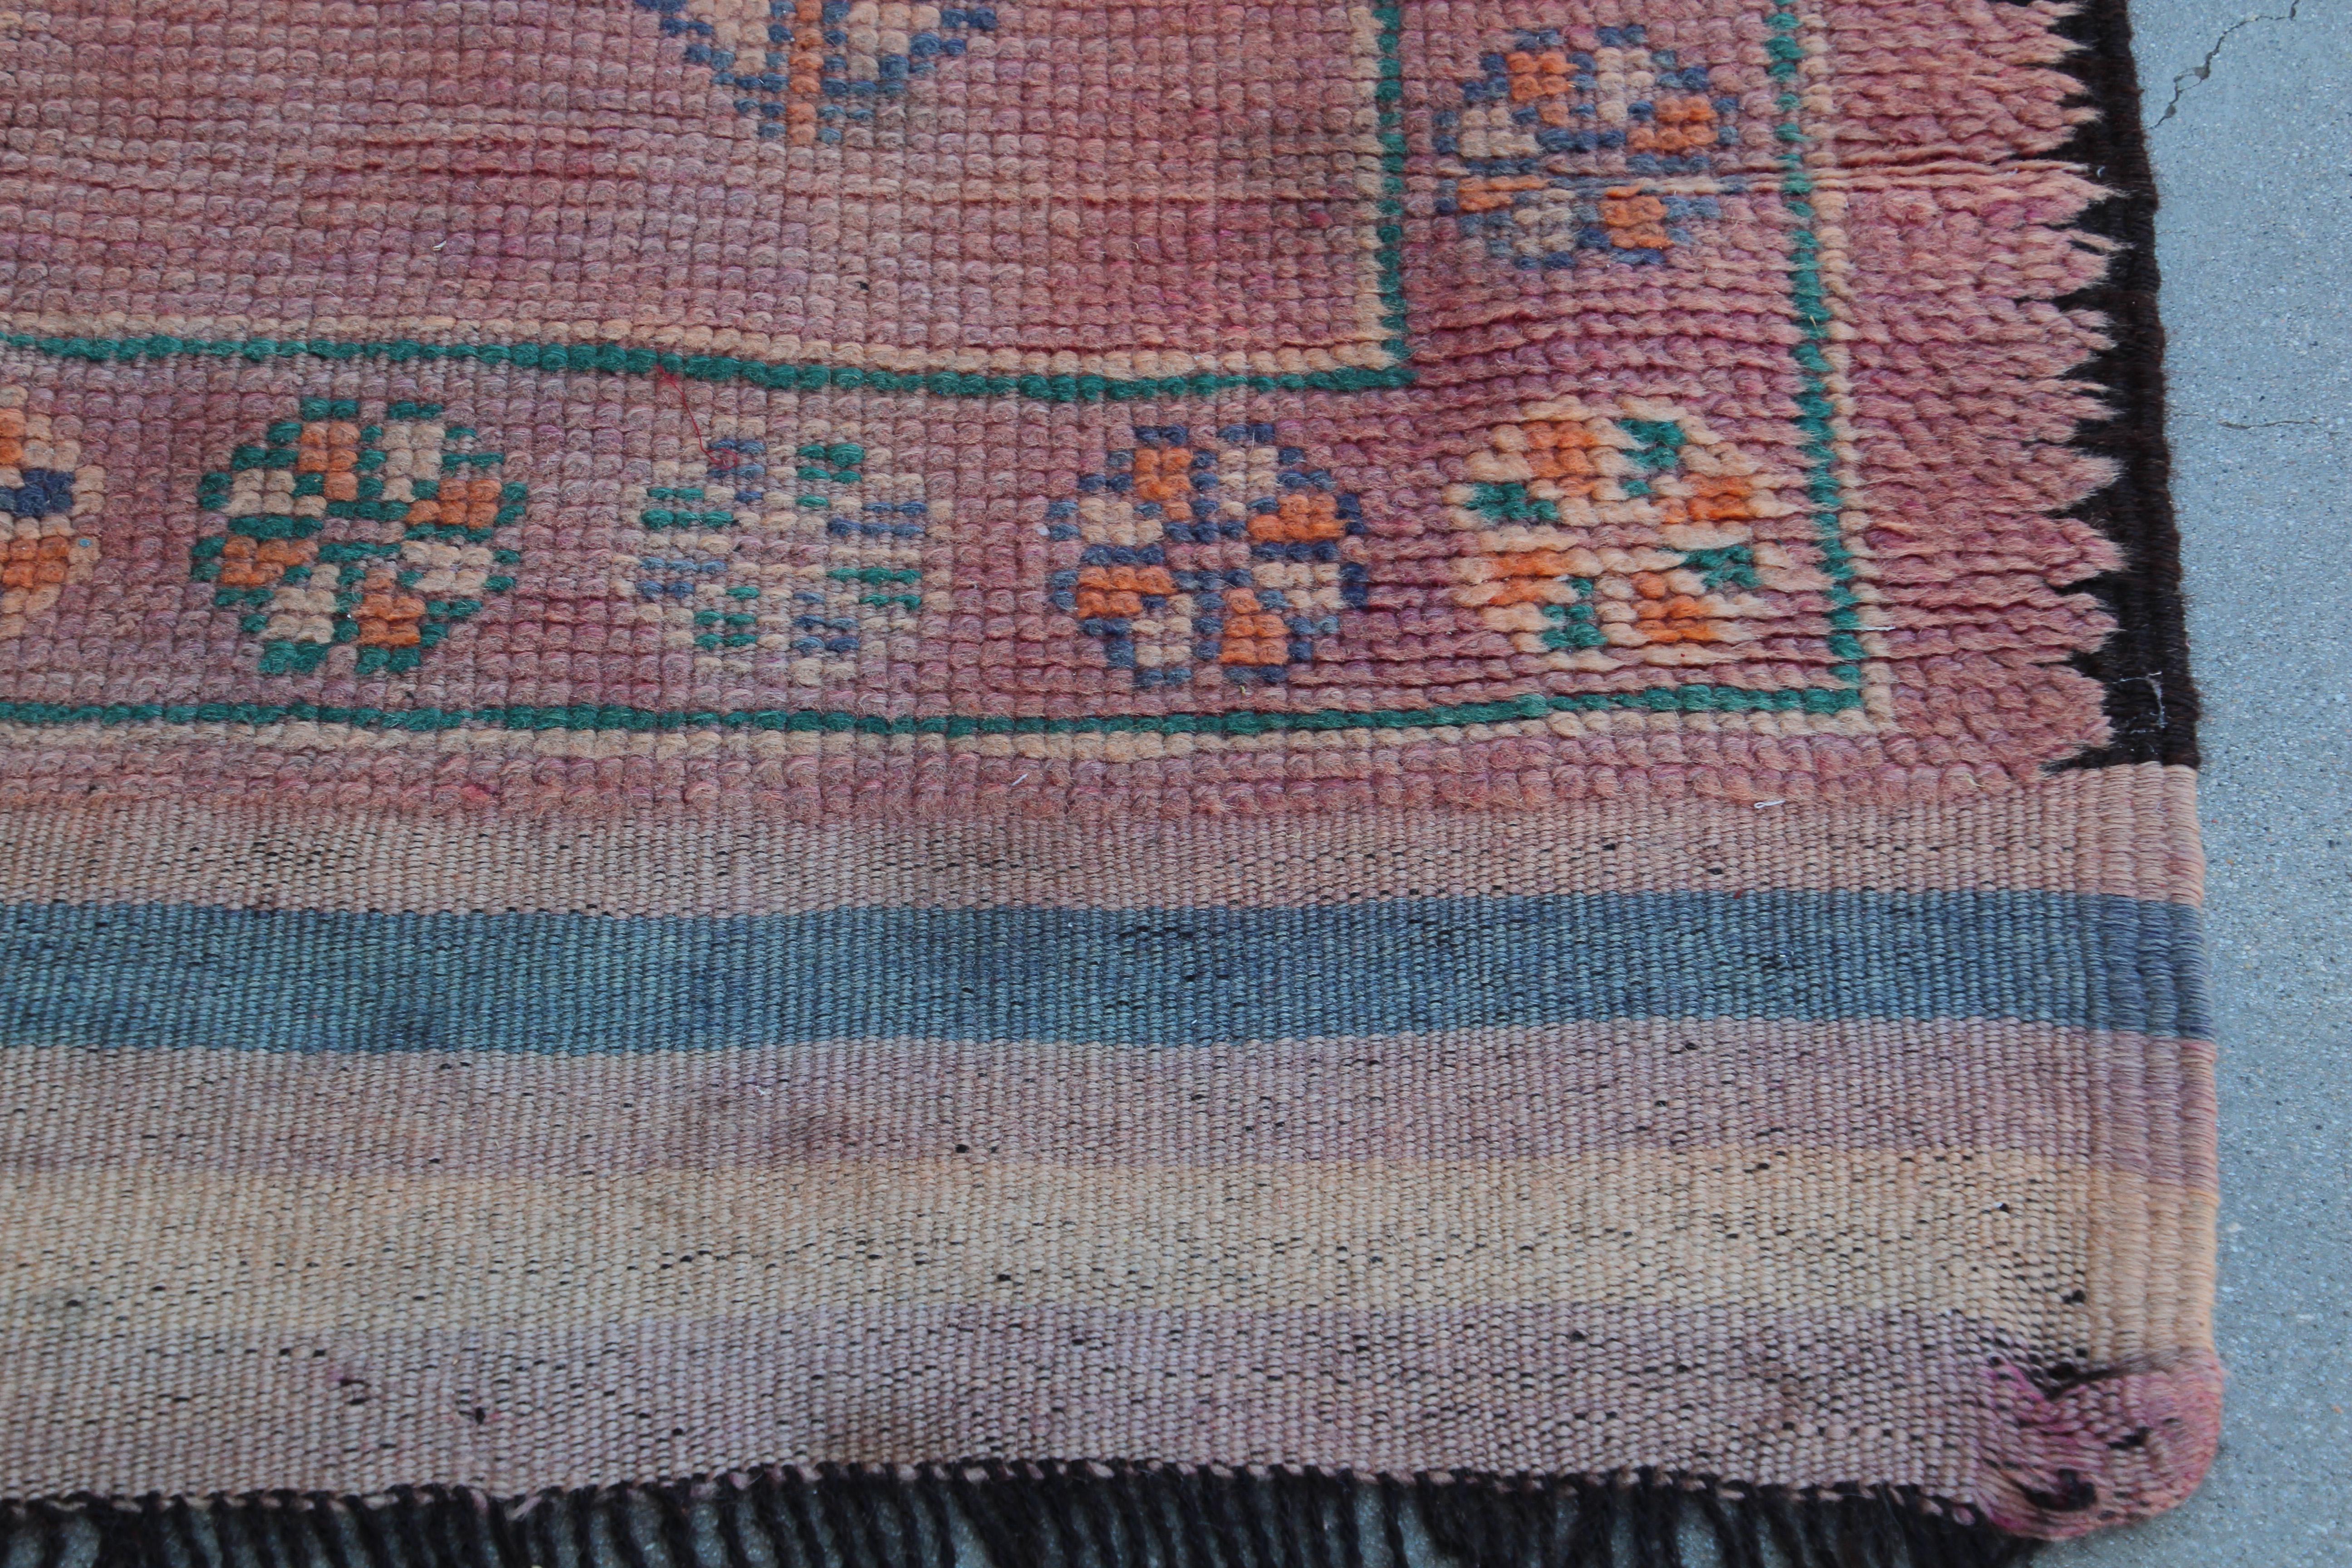 1960s Vintage Moroccan Berber Rug In Good Condition For Sale In North Hollywood, CA